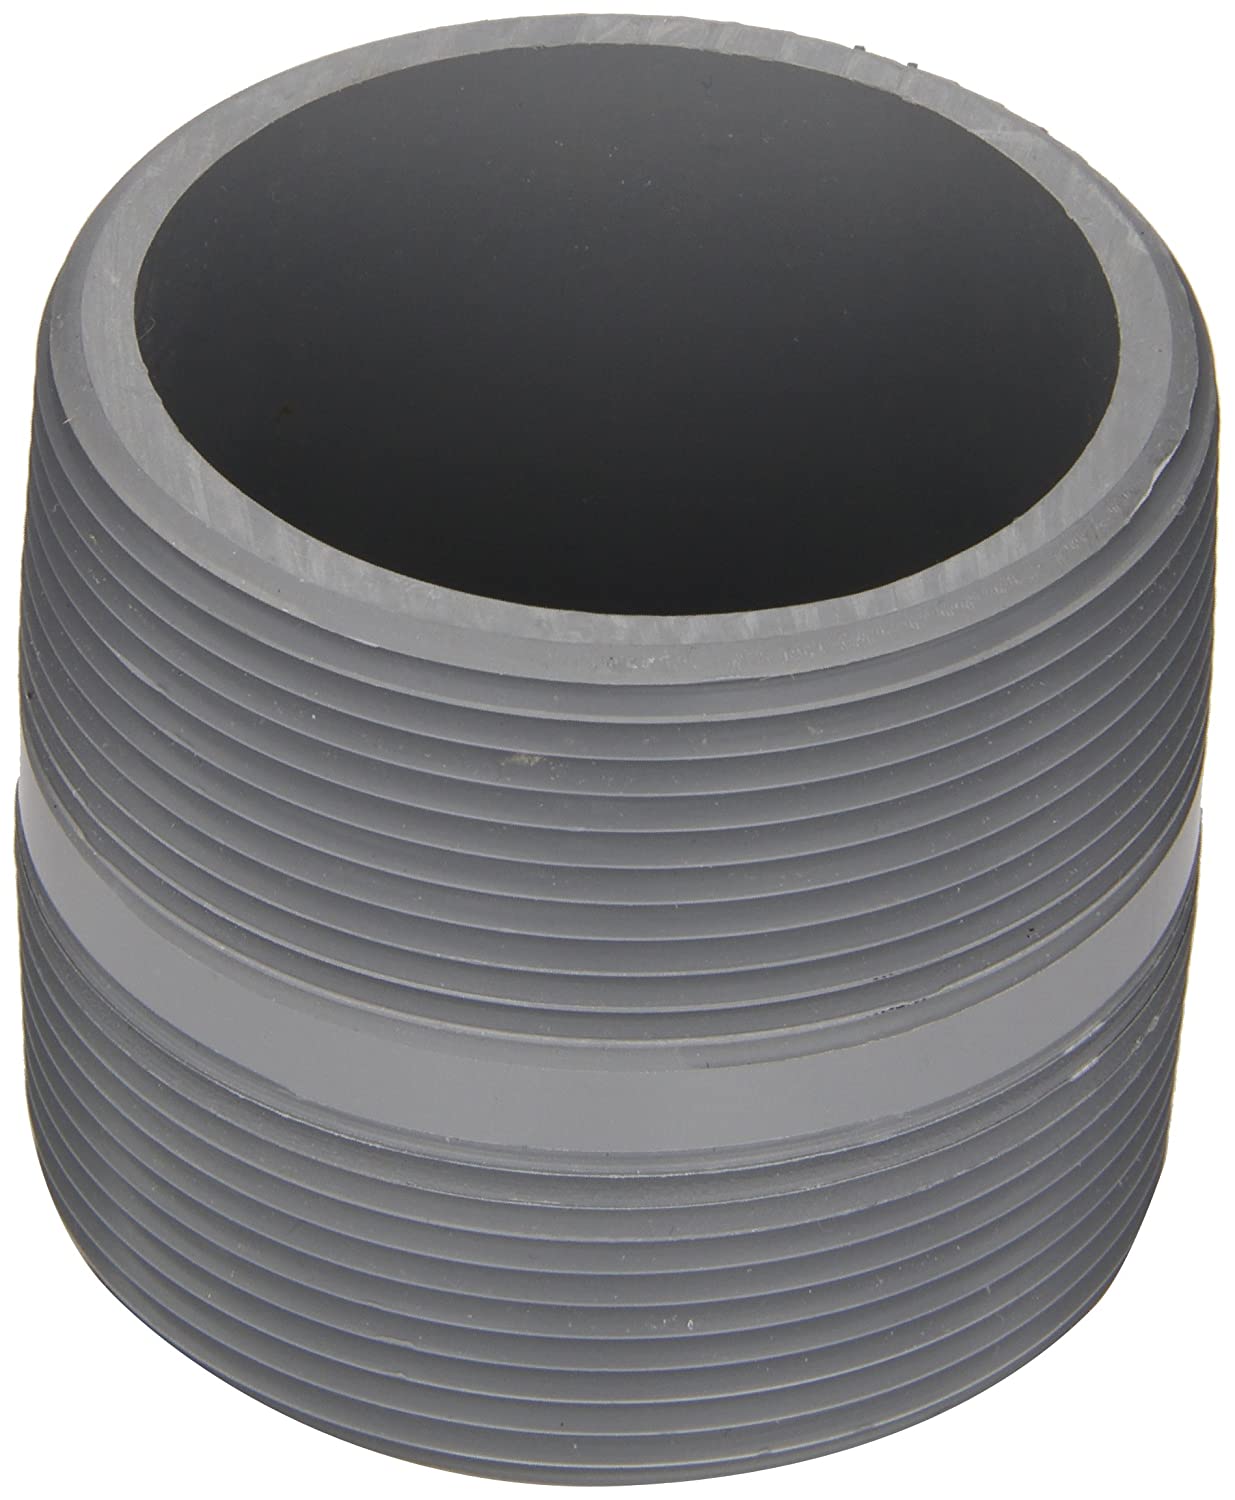 Spears 883-040C - CPVC Pipe Fitting, Nipple, Schedule 80, Gray, 3/4" NPT Male, 4" Length